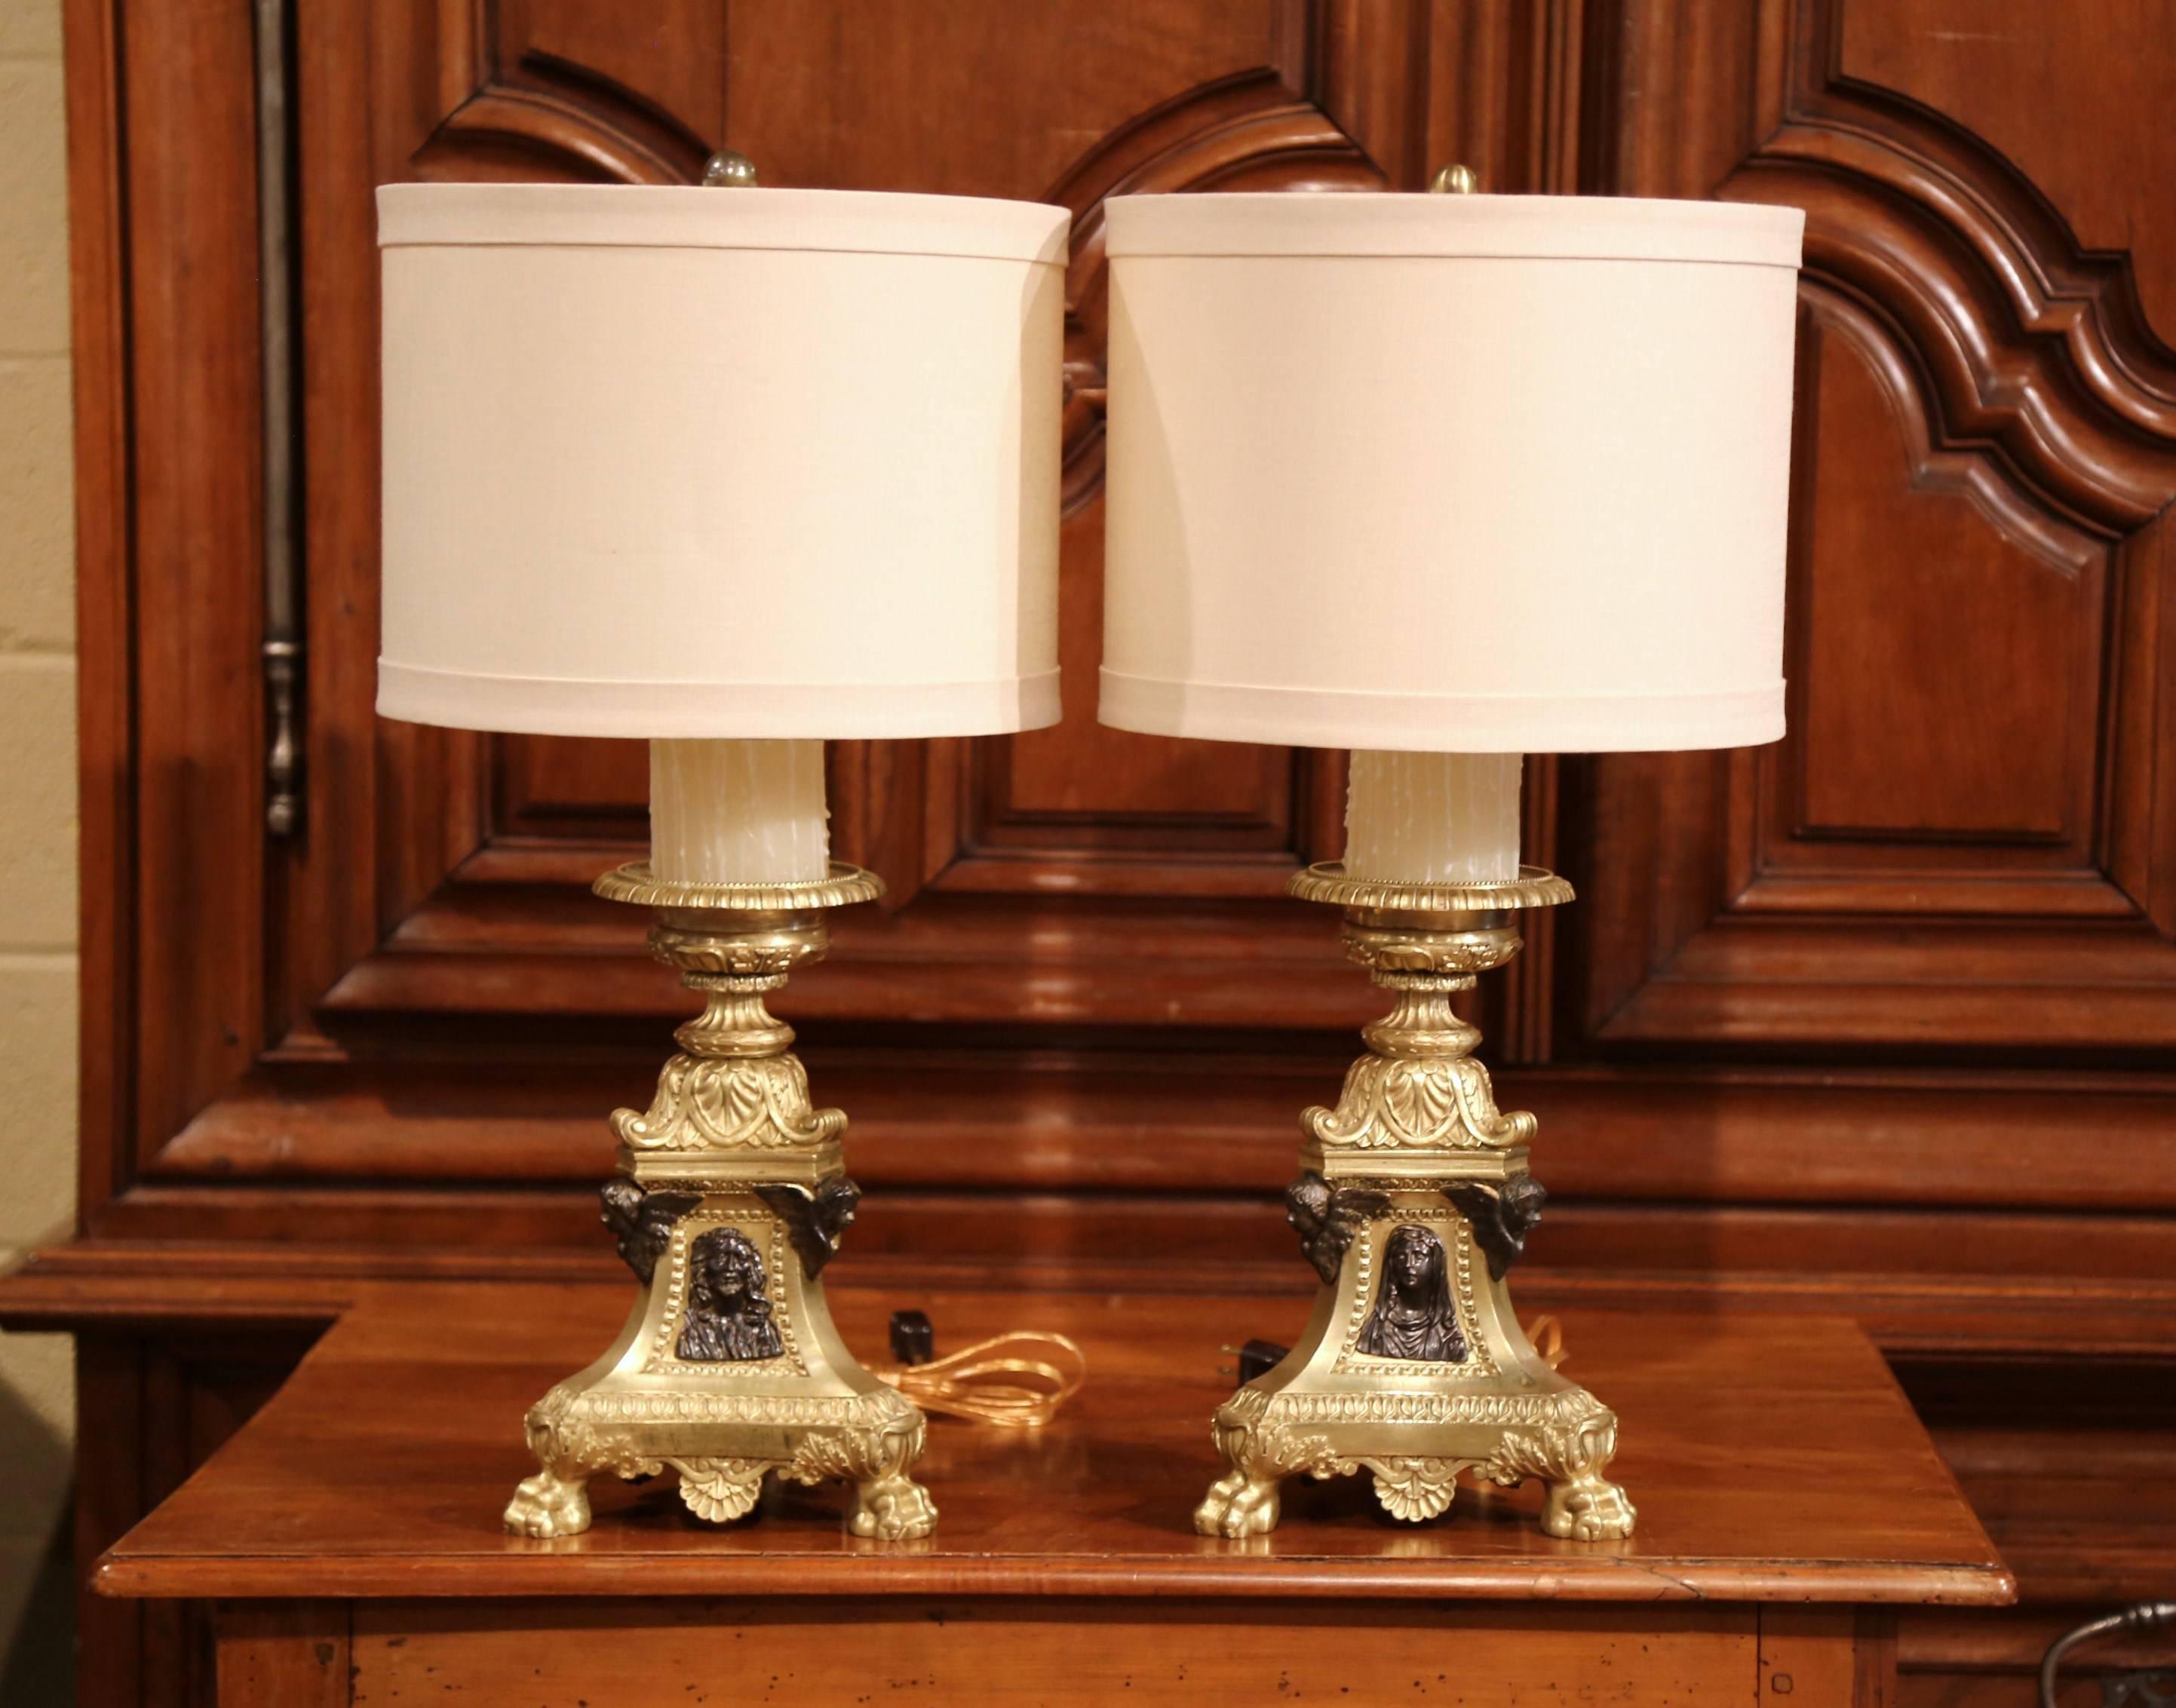 Patinated Pair of 19th Century French Two-Tone Bronze Candlesticks Made into Table Lamps